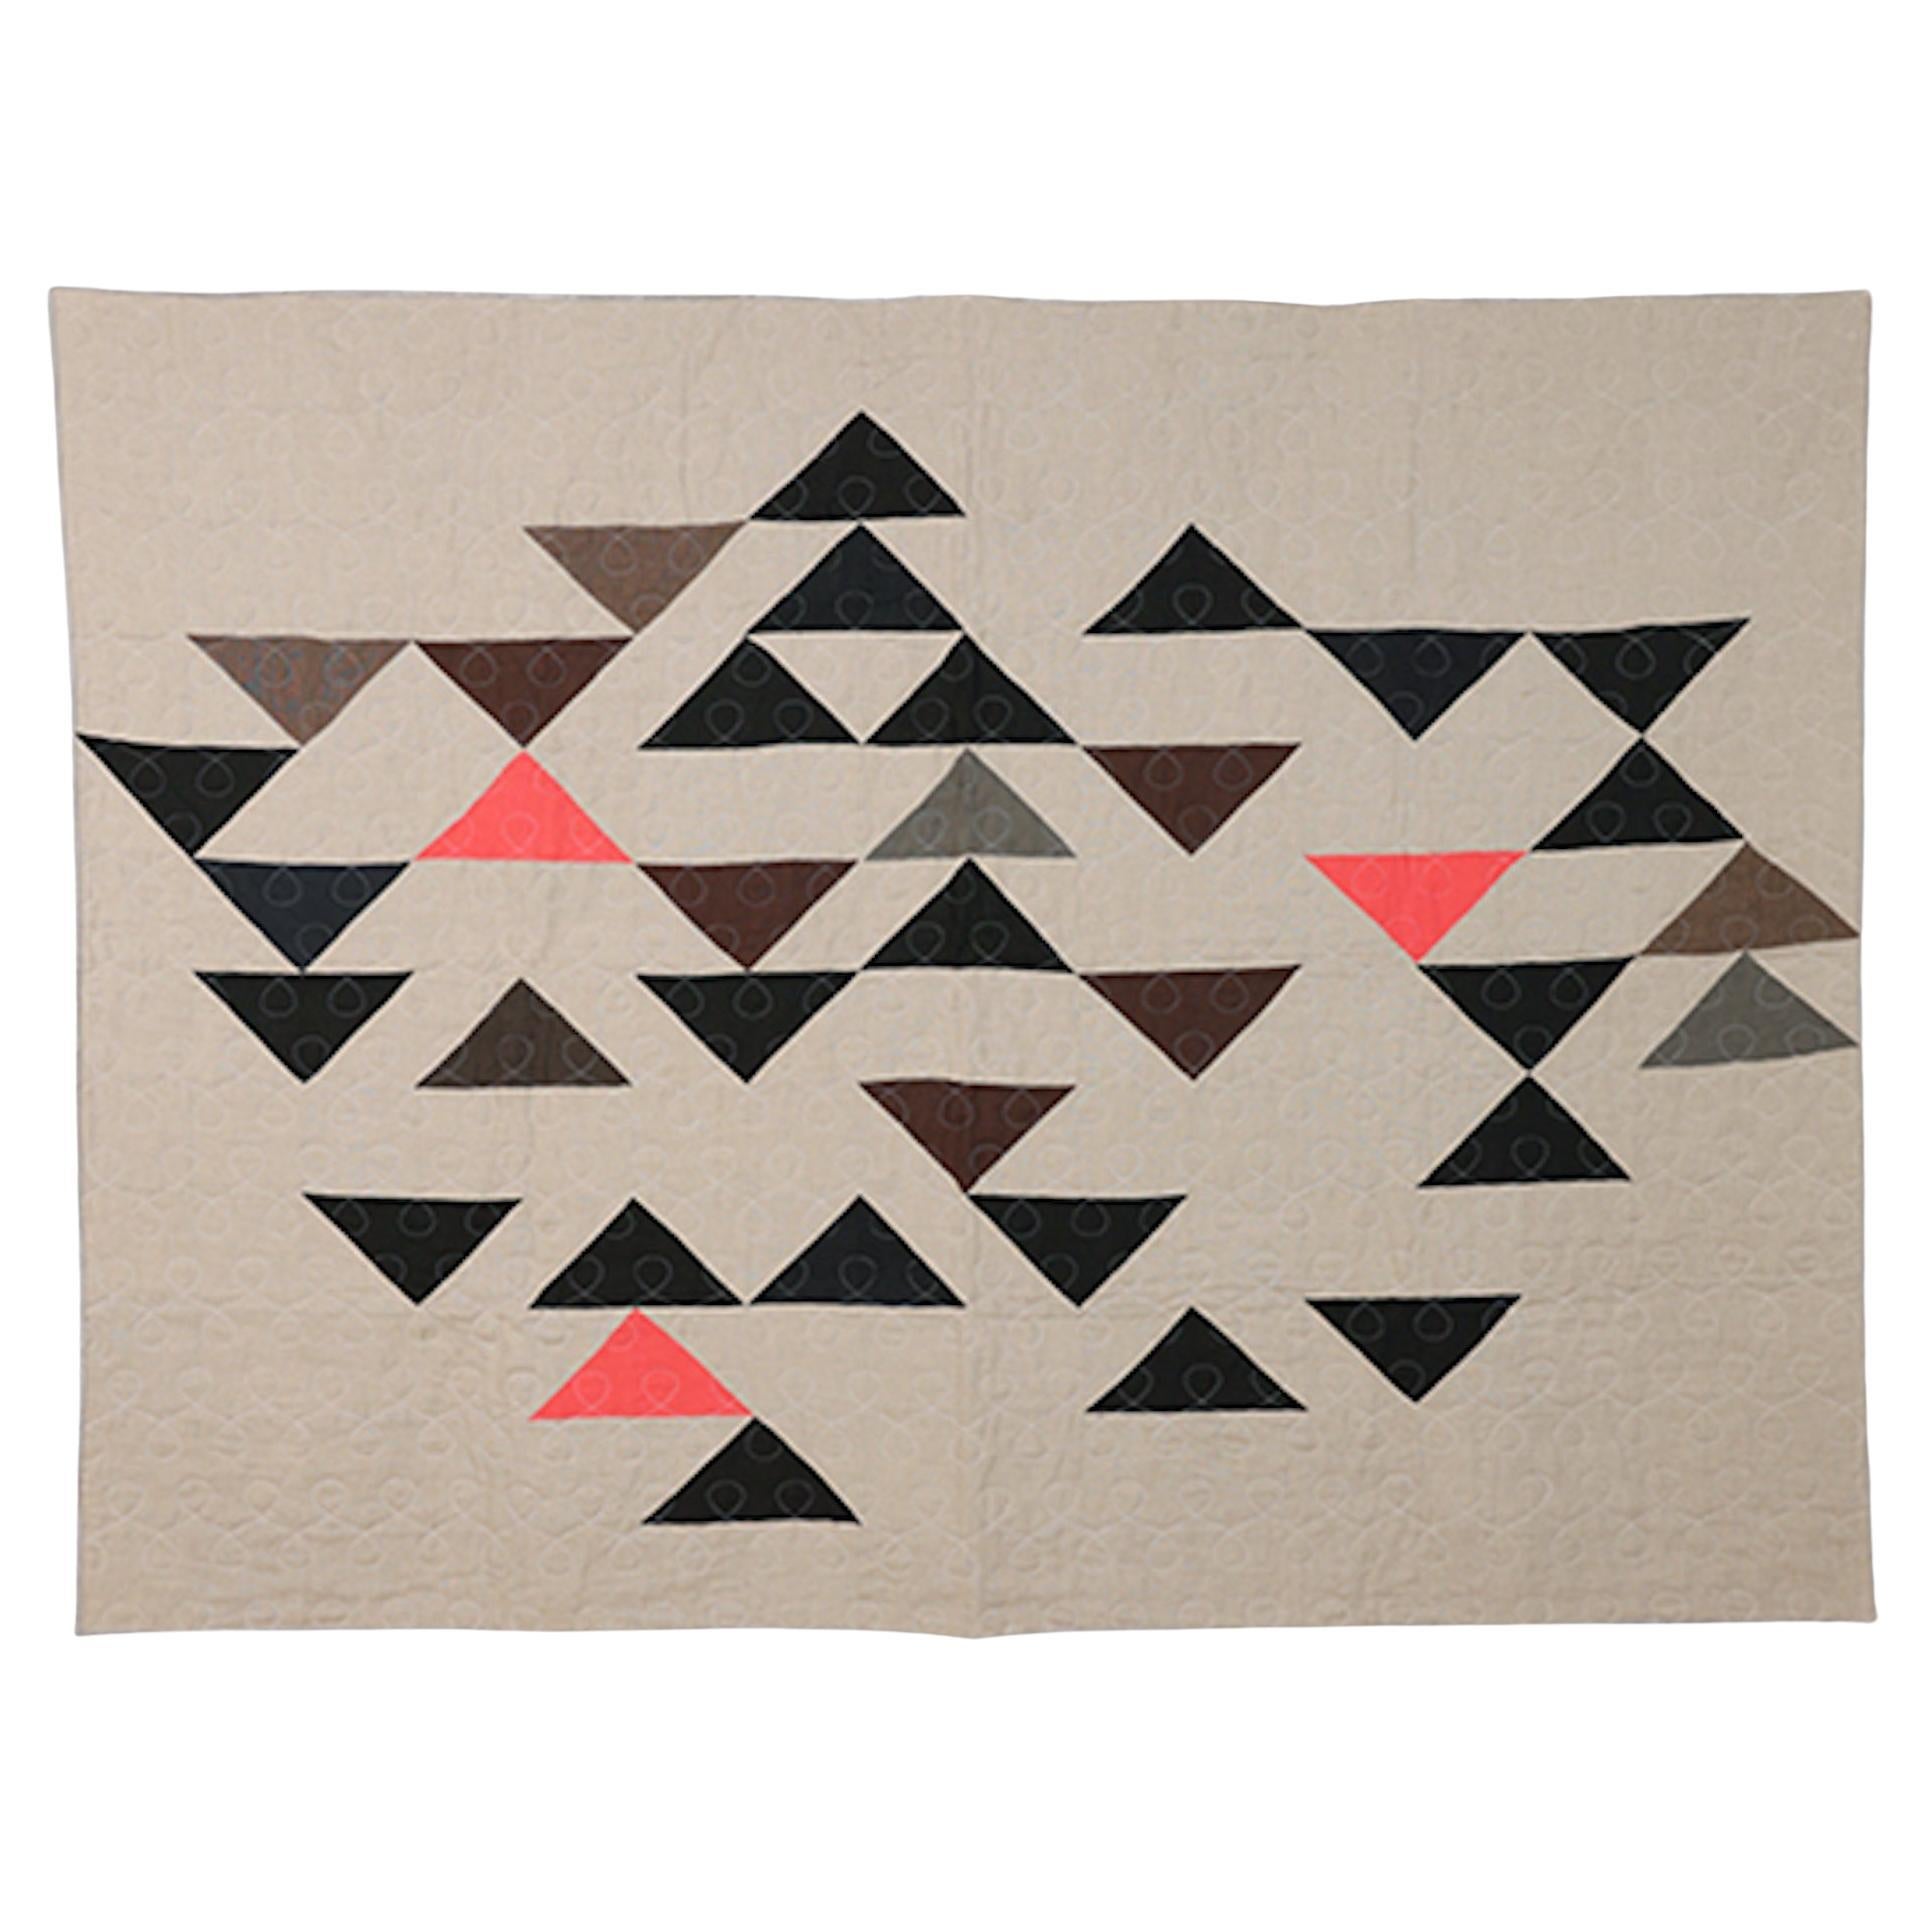 Contemporary hand-sewn Trianni quilt by British master maker For Sale